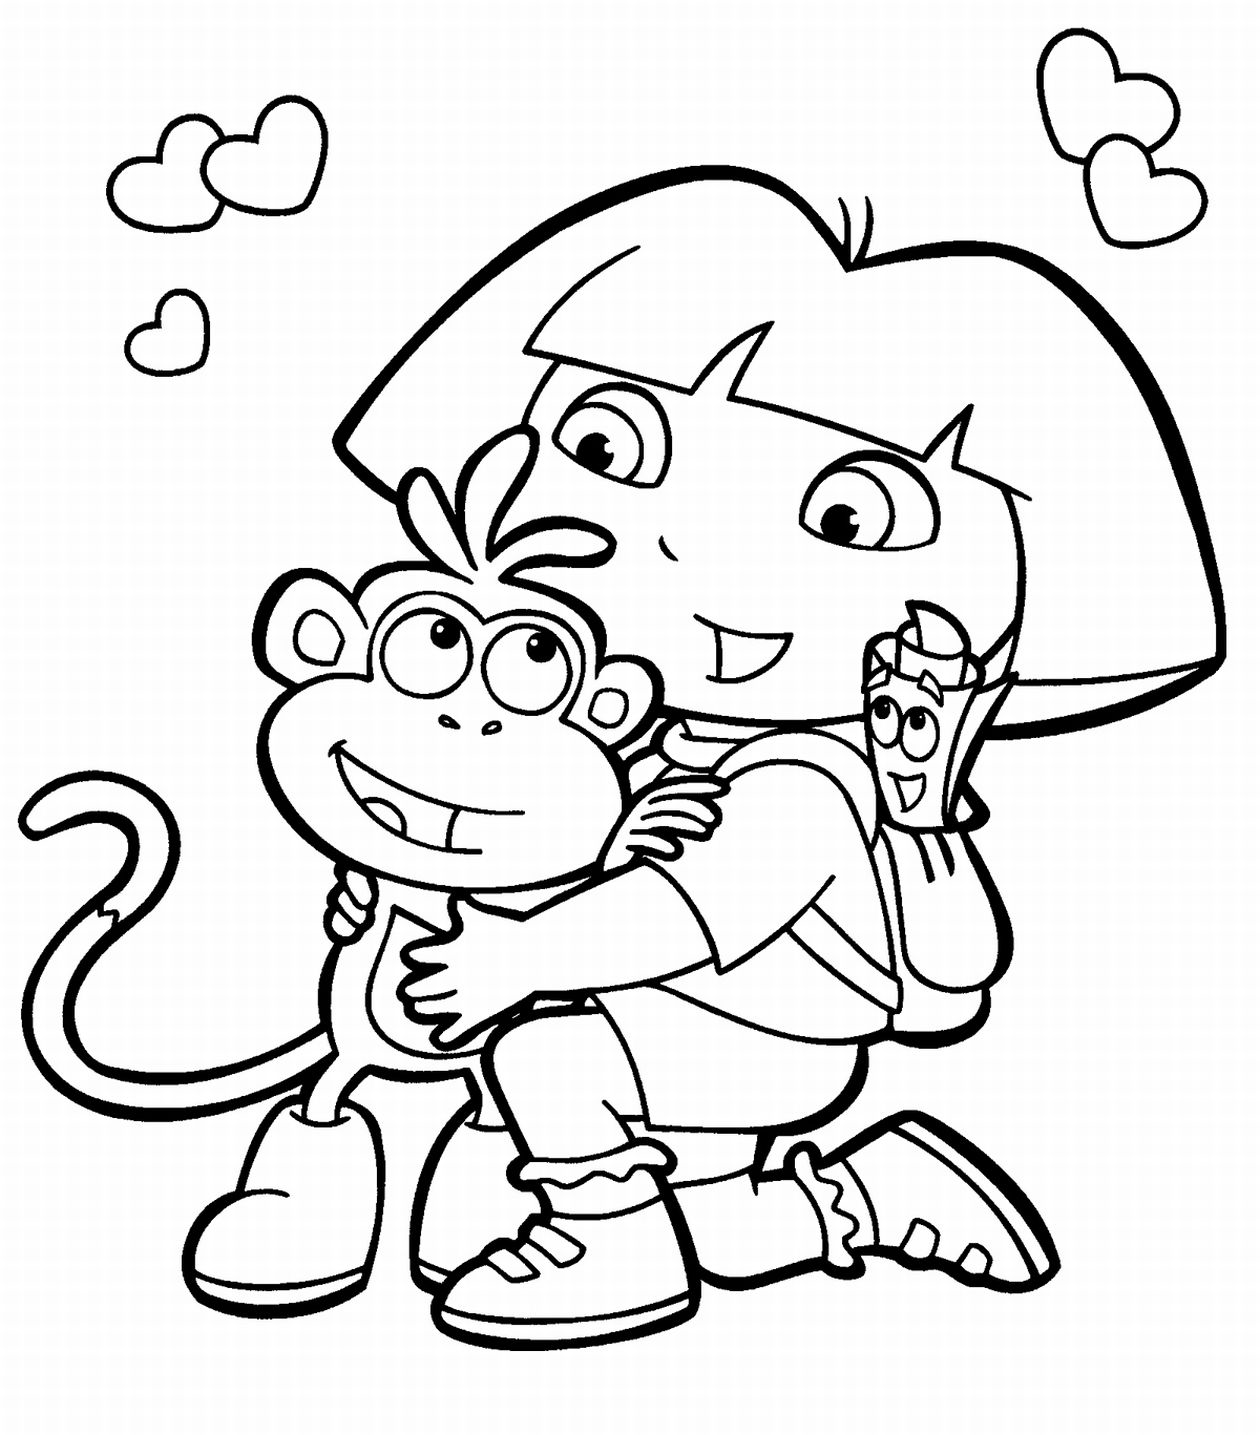 Dora Coloring in Pages 2